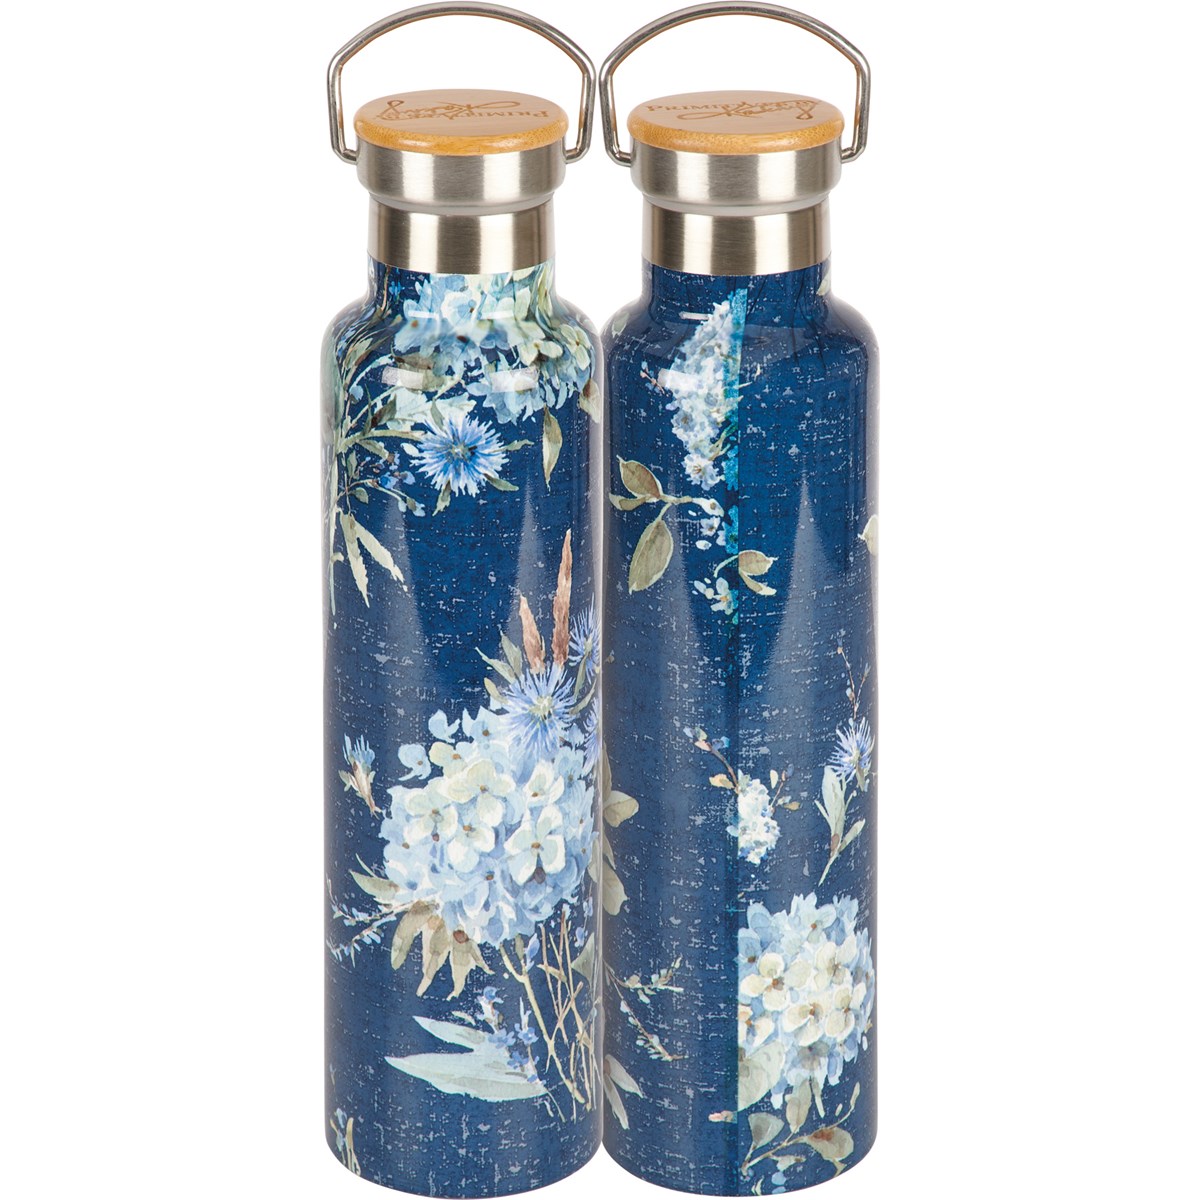 Blue Florals Insulated Bottle - Stainless Steel, Bamboo